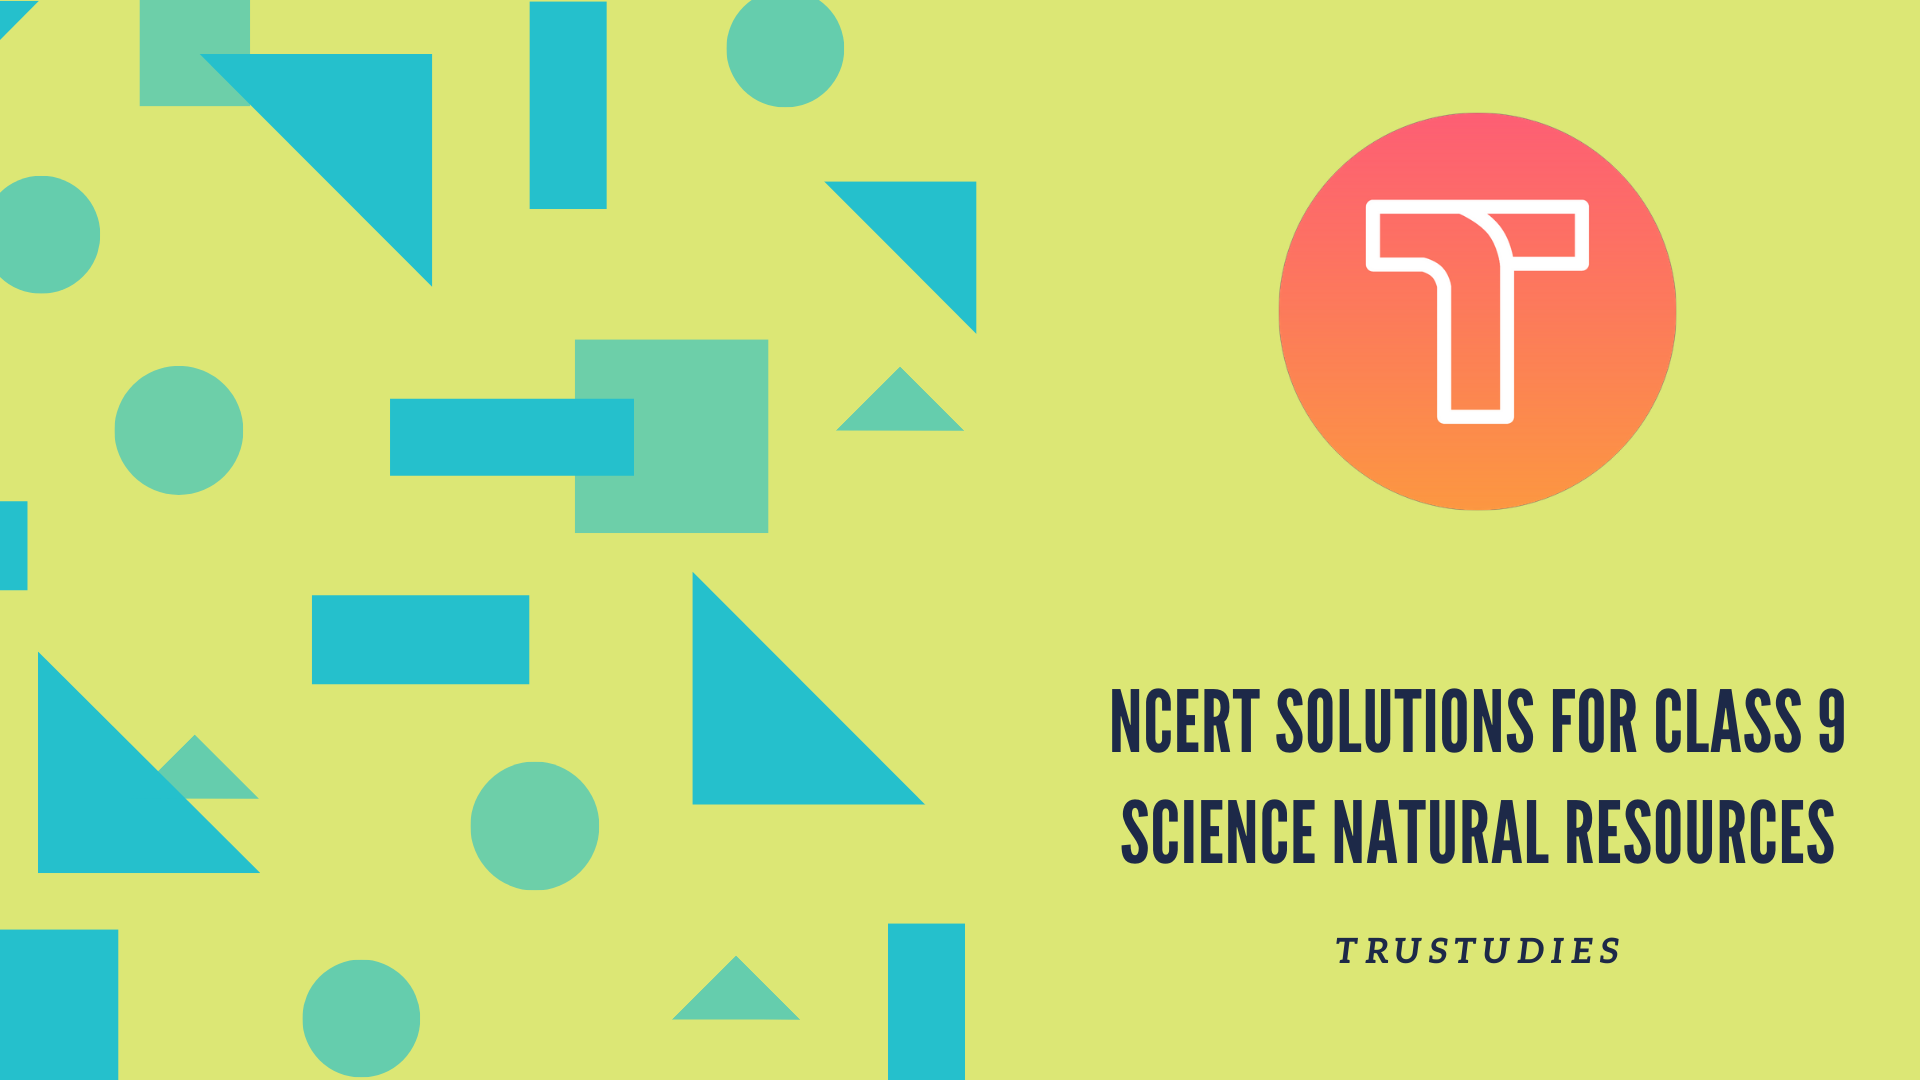 NCERT solutions for class 9 science chapter 14 natural resources banner image